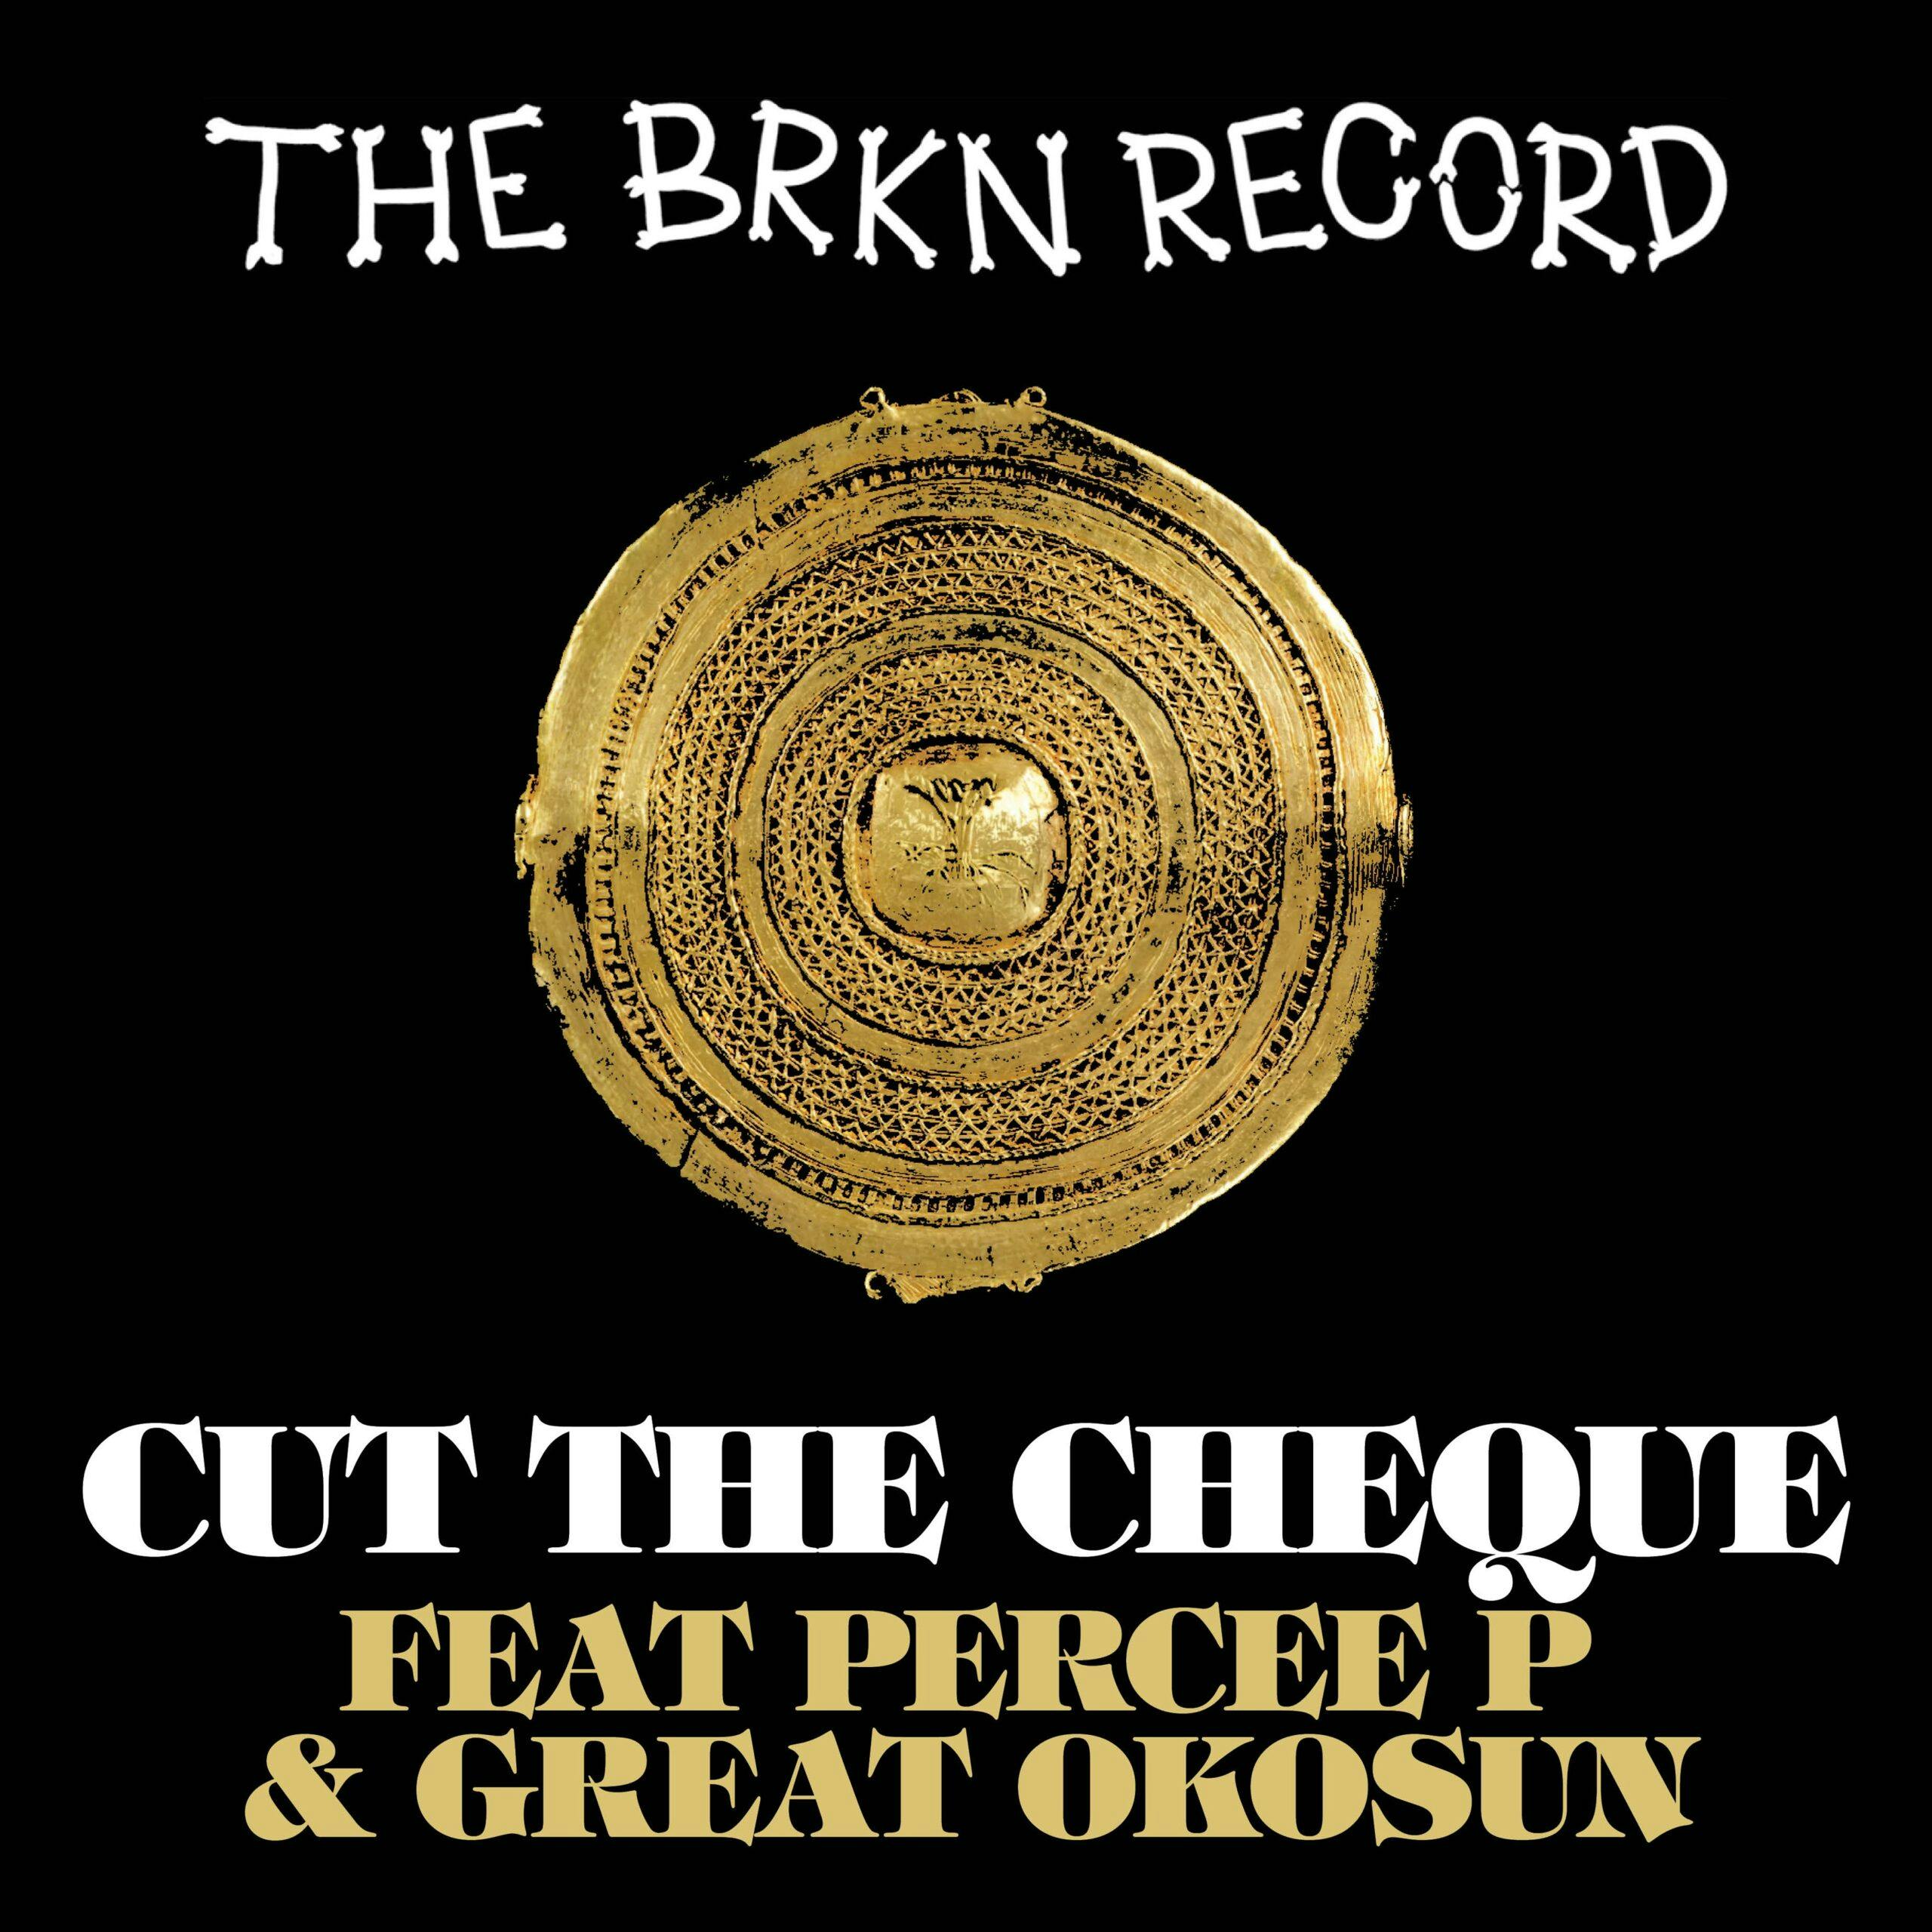 Introducing "Cut The Cheque" - the groundbreaking single from the highly anticipated sophomore album by The Brkn Record, The Architecture of Oppression Part 2. This album is set to delve deep into the human condition and shed light on the impact of systemic racism.